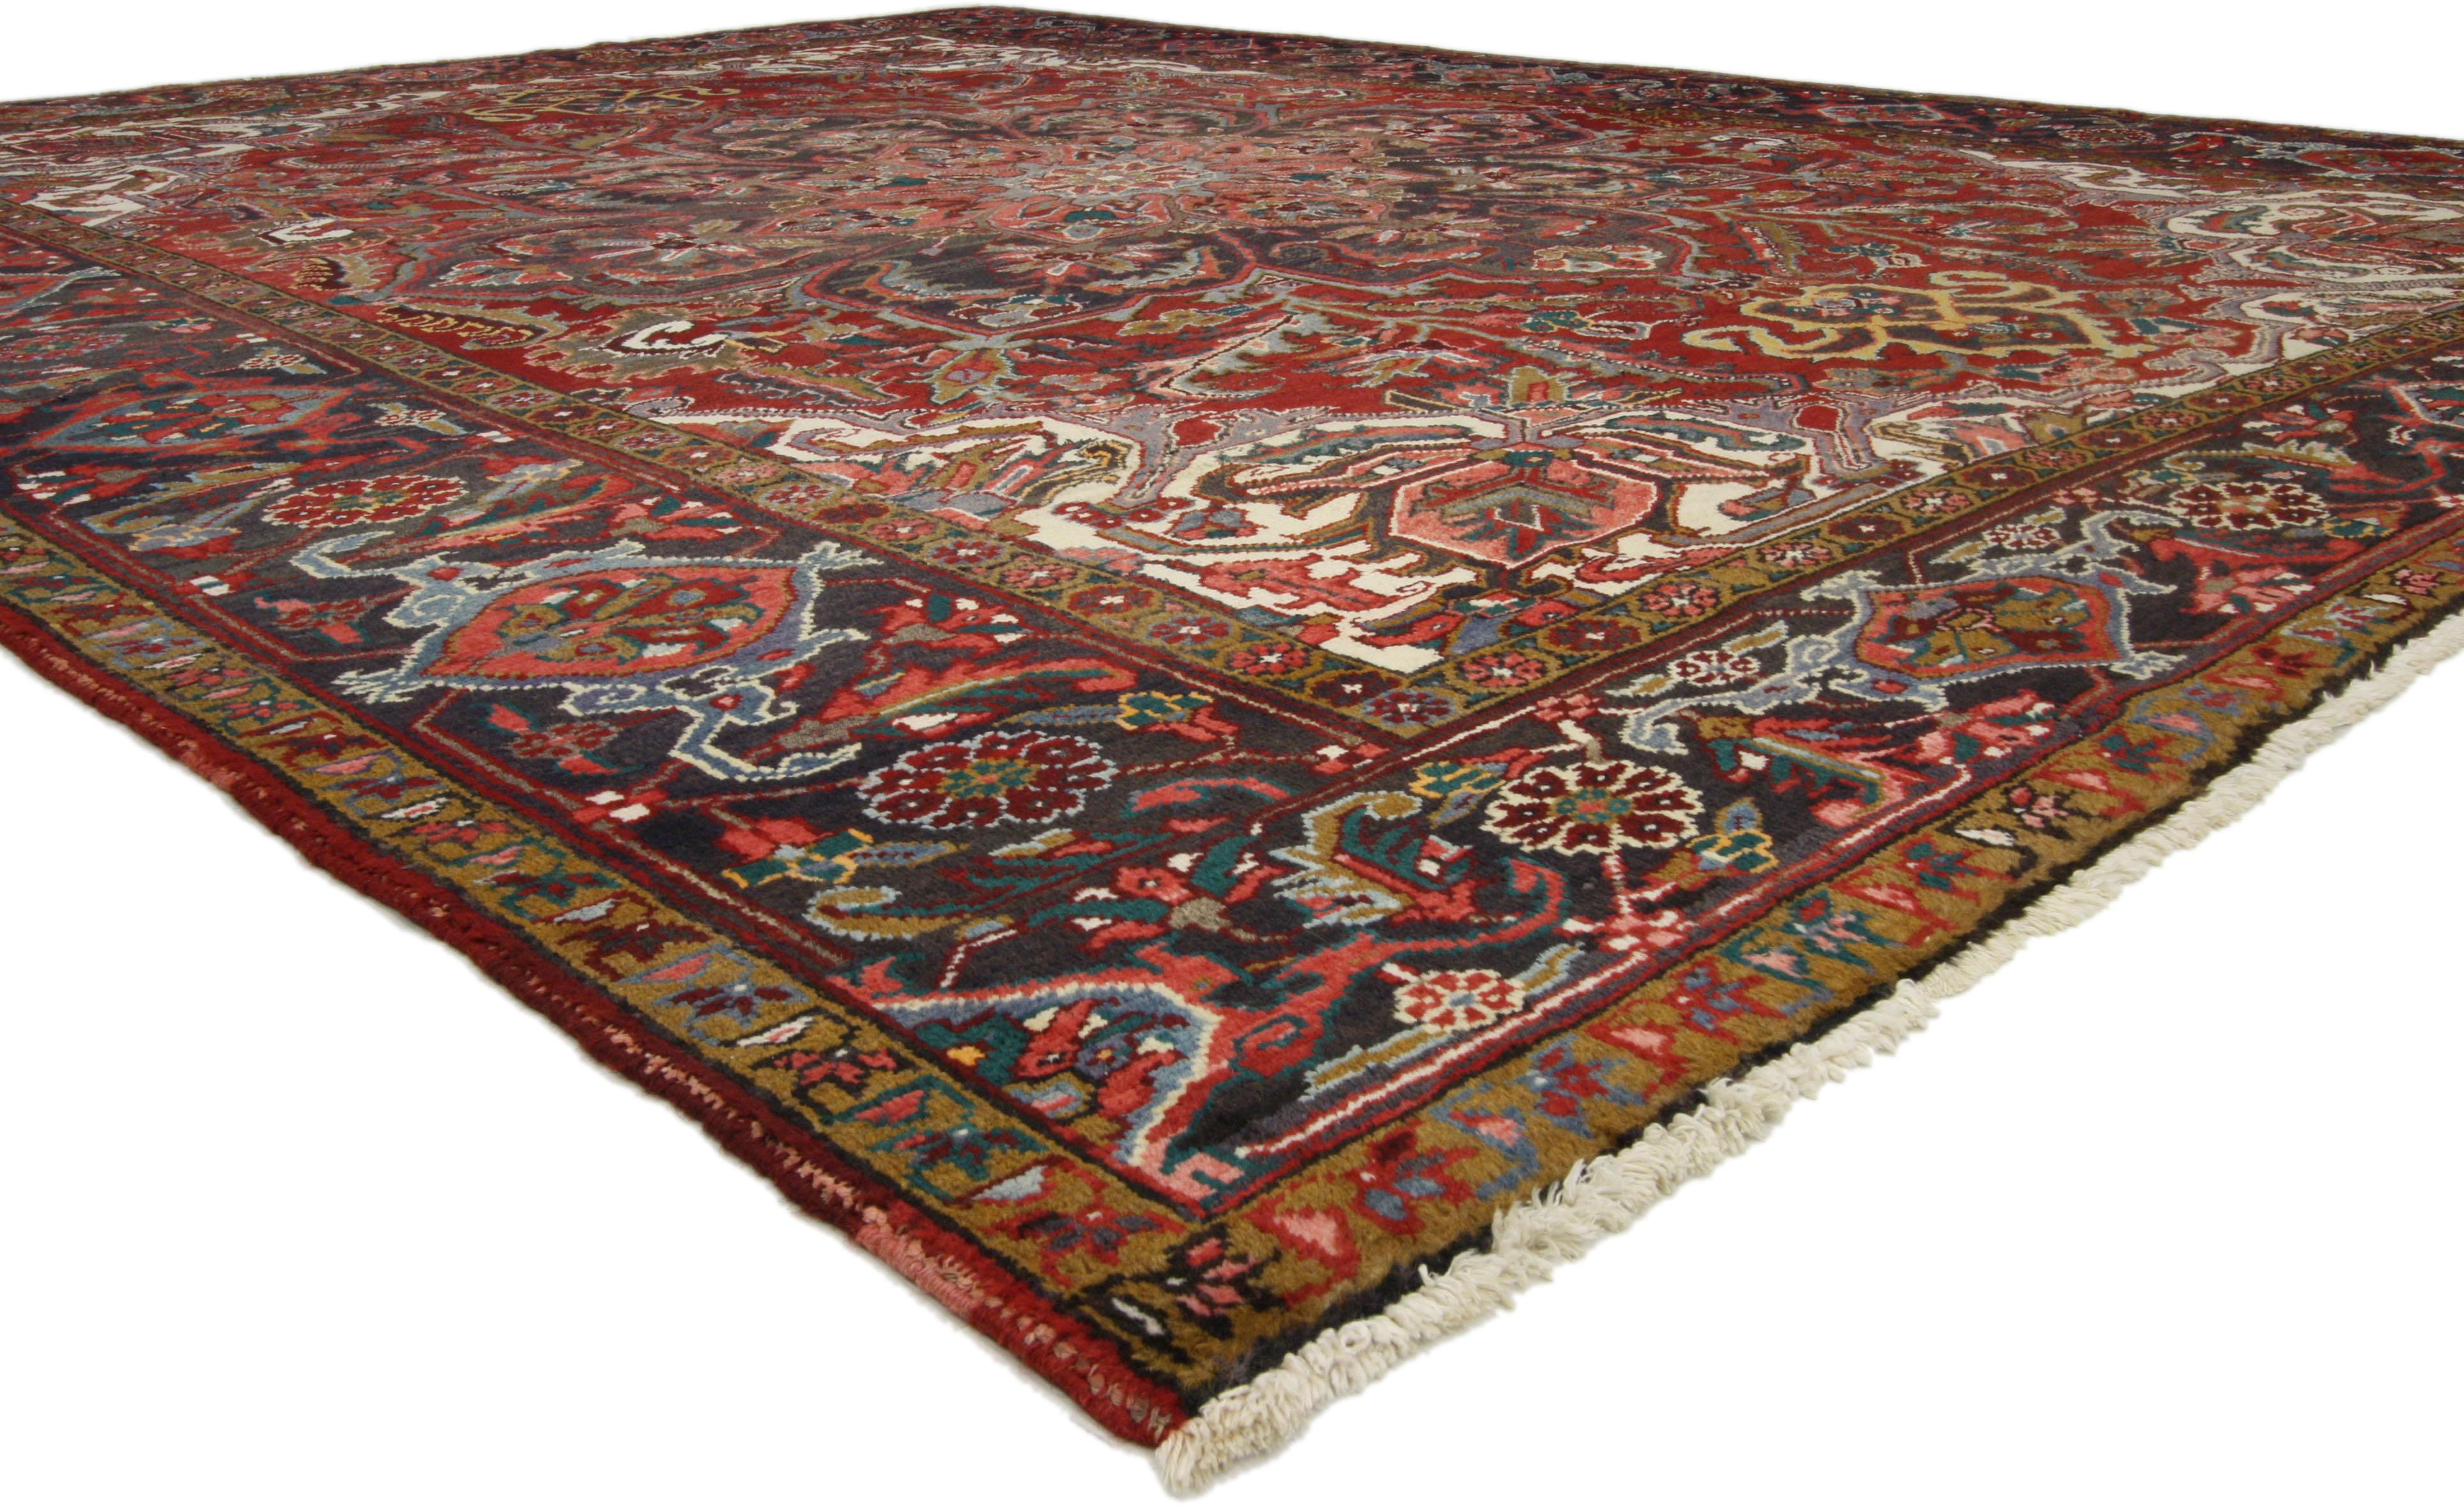 74496, Mid-Century Modern vintage Persian Heriz rug with craftsman style. This hand knotted wool vintage Persian Heriz rug features an ornate floral lobed center medallion across an abrashed scarlet red field. Large palmettes, lanceolate leaves,